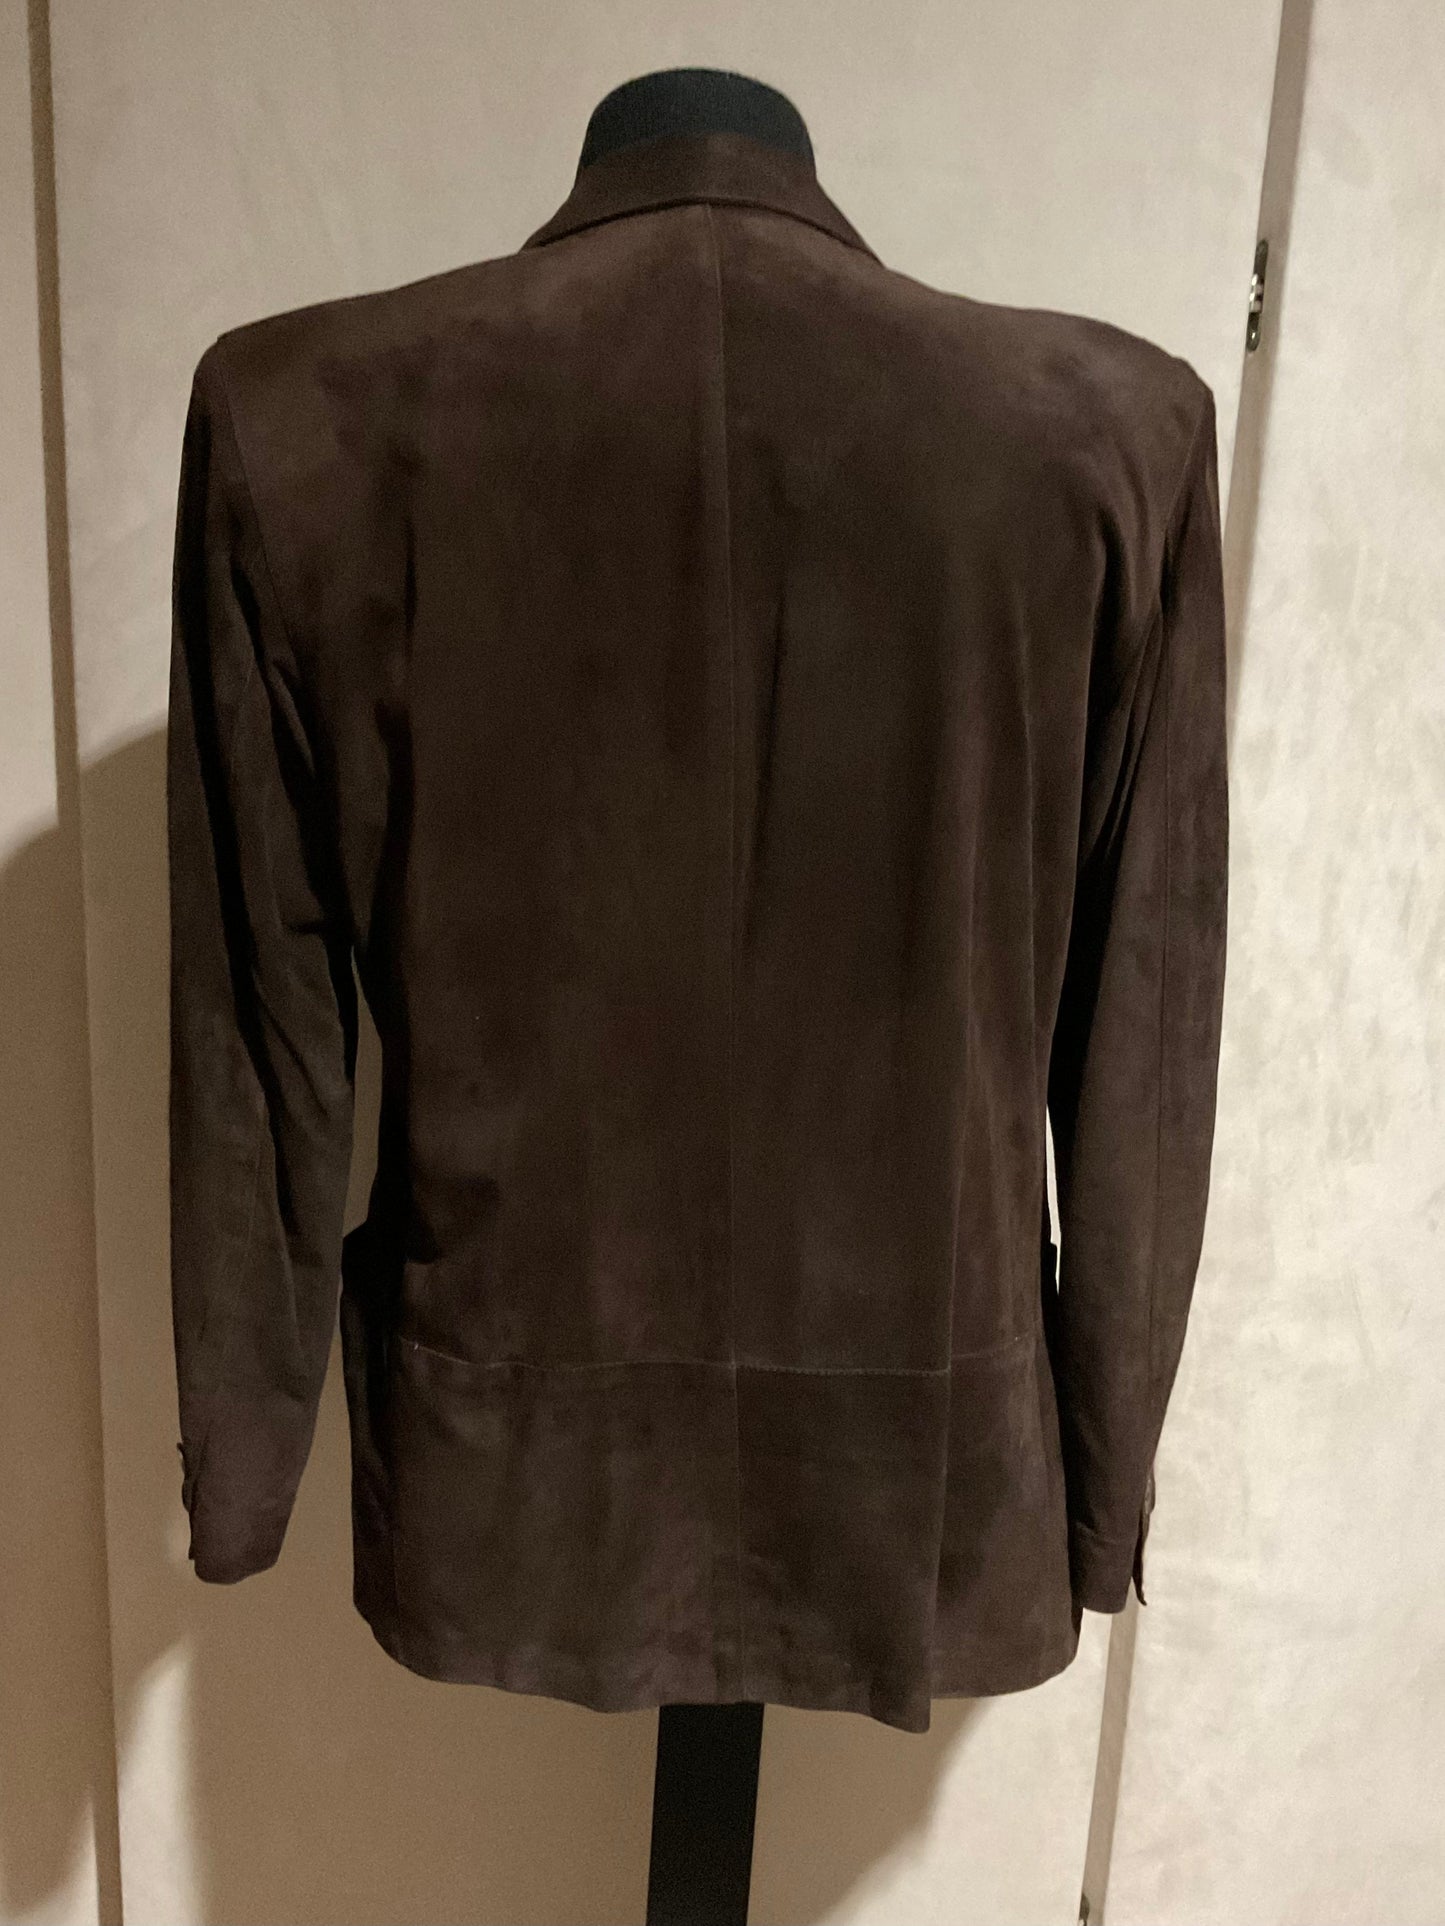 R P SUEDE DOUBLE BREASTED BLAZER JACKET / BROWN / MEDIUM / MADE IN ITALY